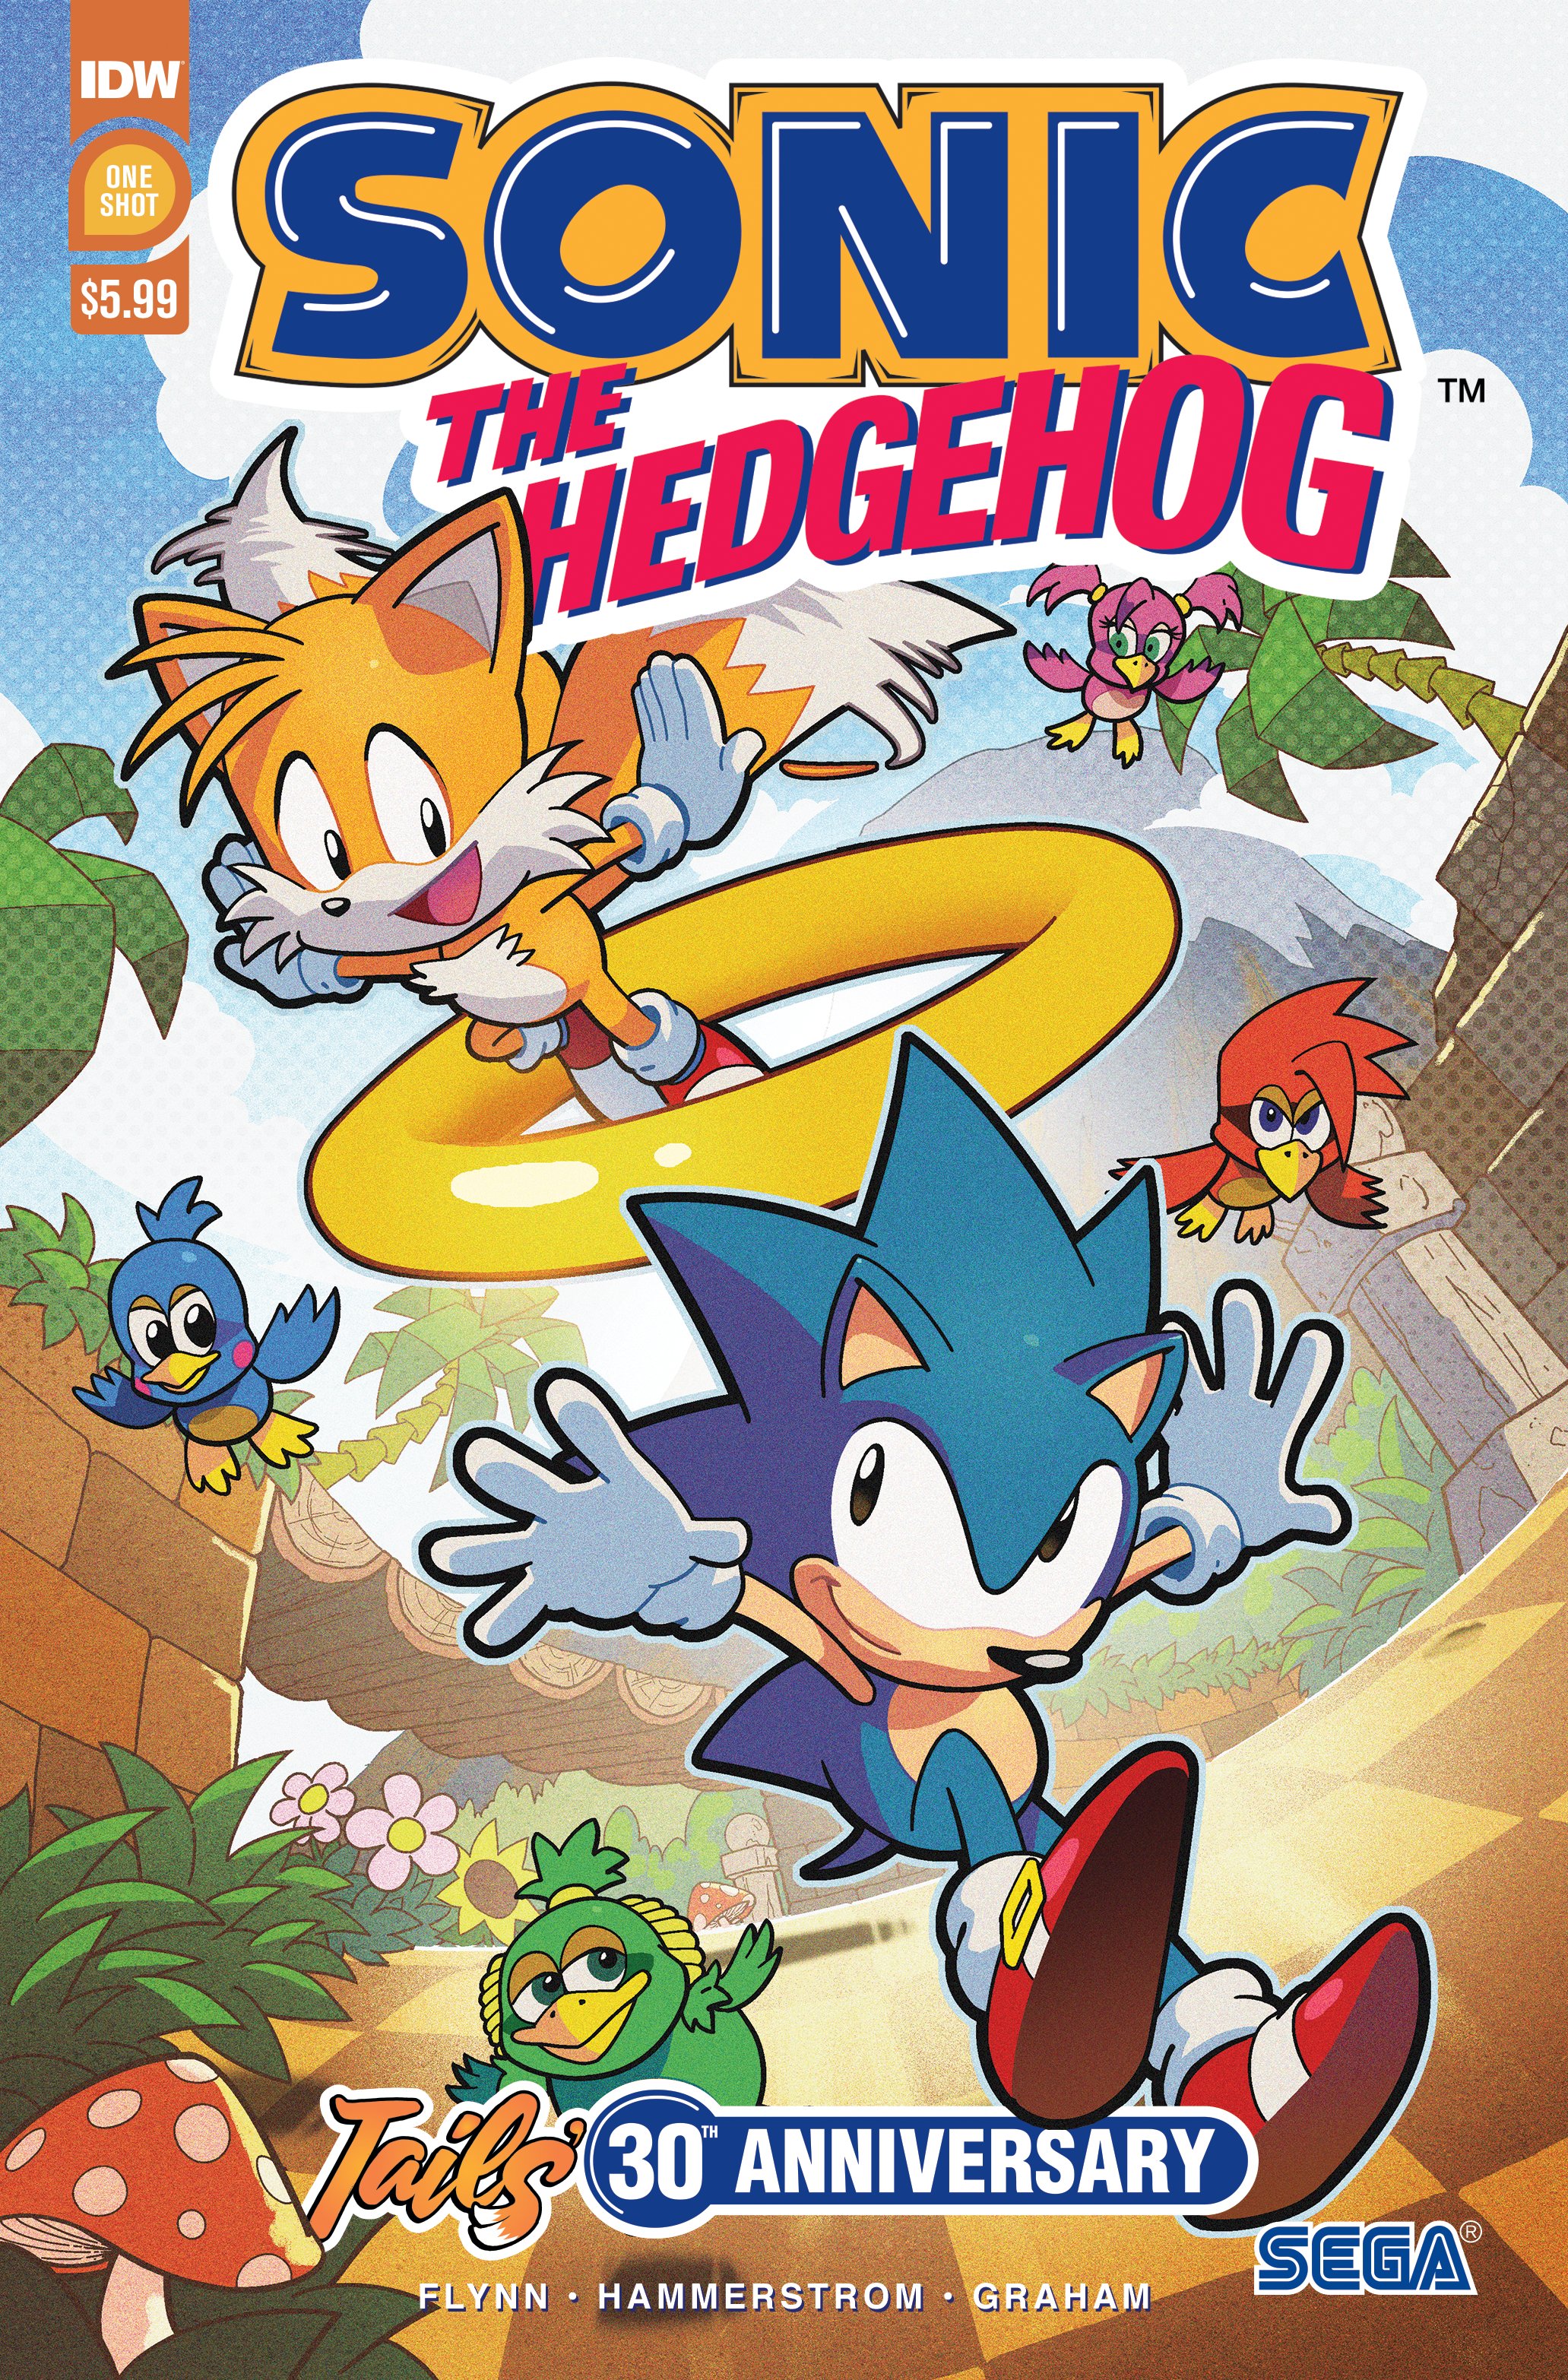 Sonic the Hedgehog: Amy's 30th Anniversary Special #1 - Comic Book Preview